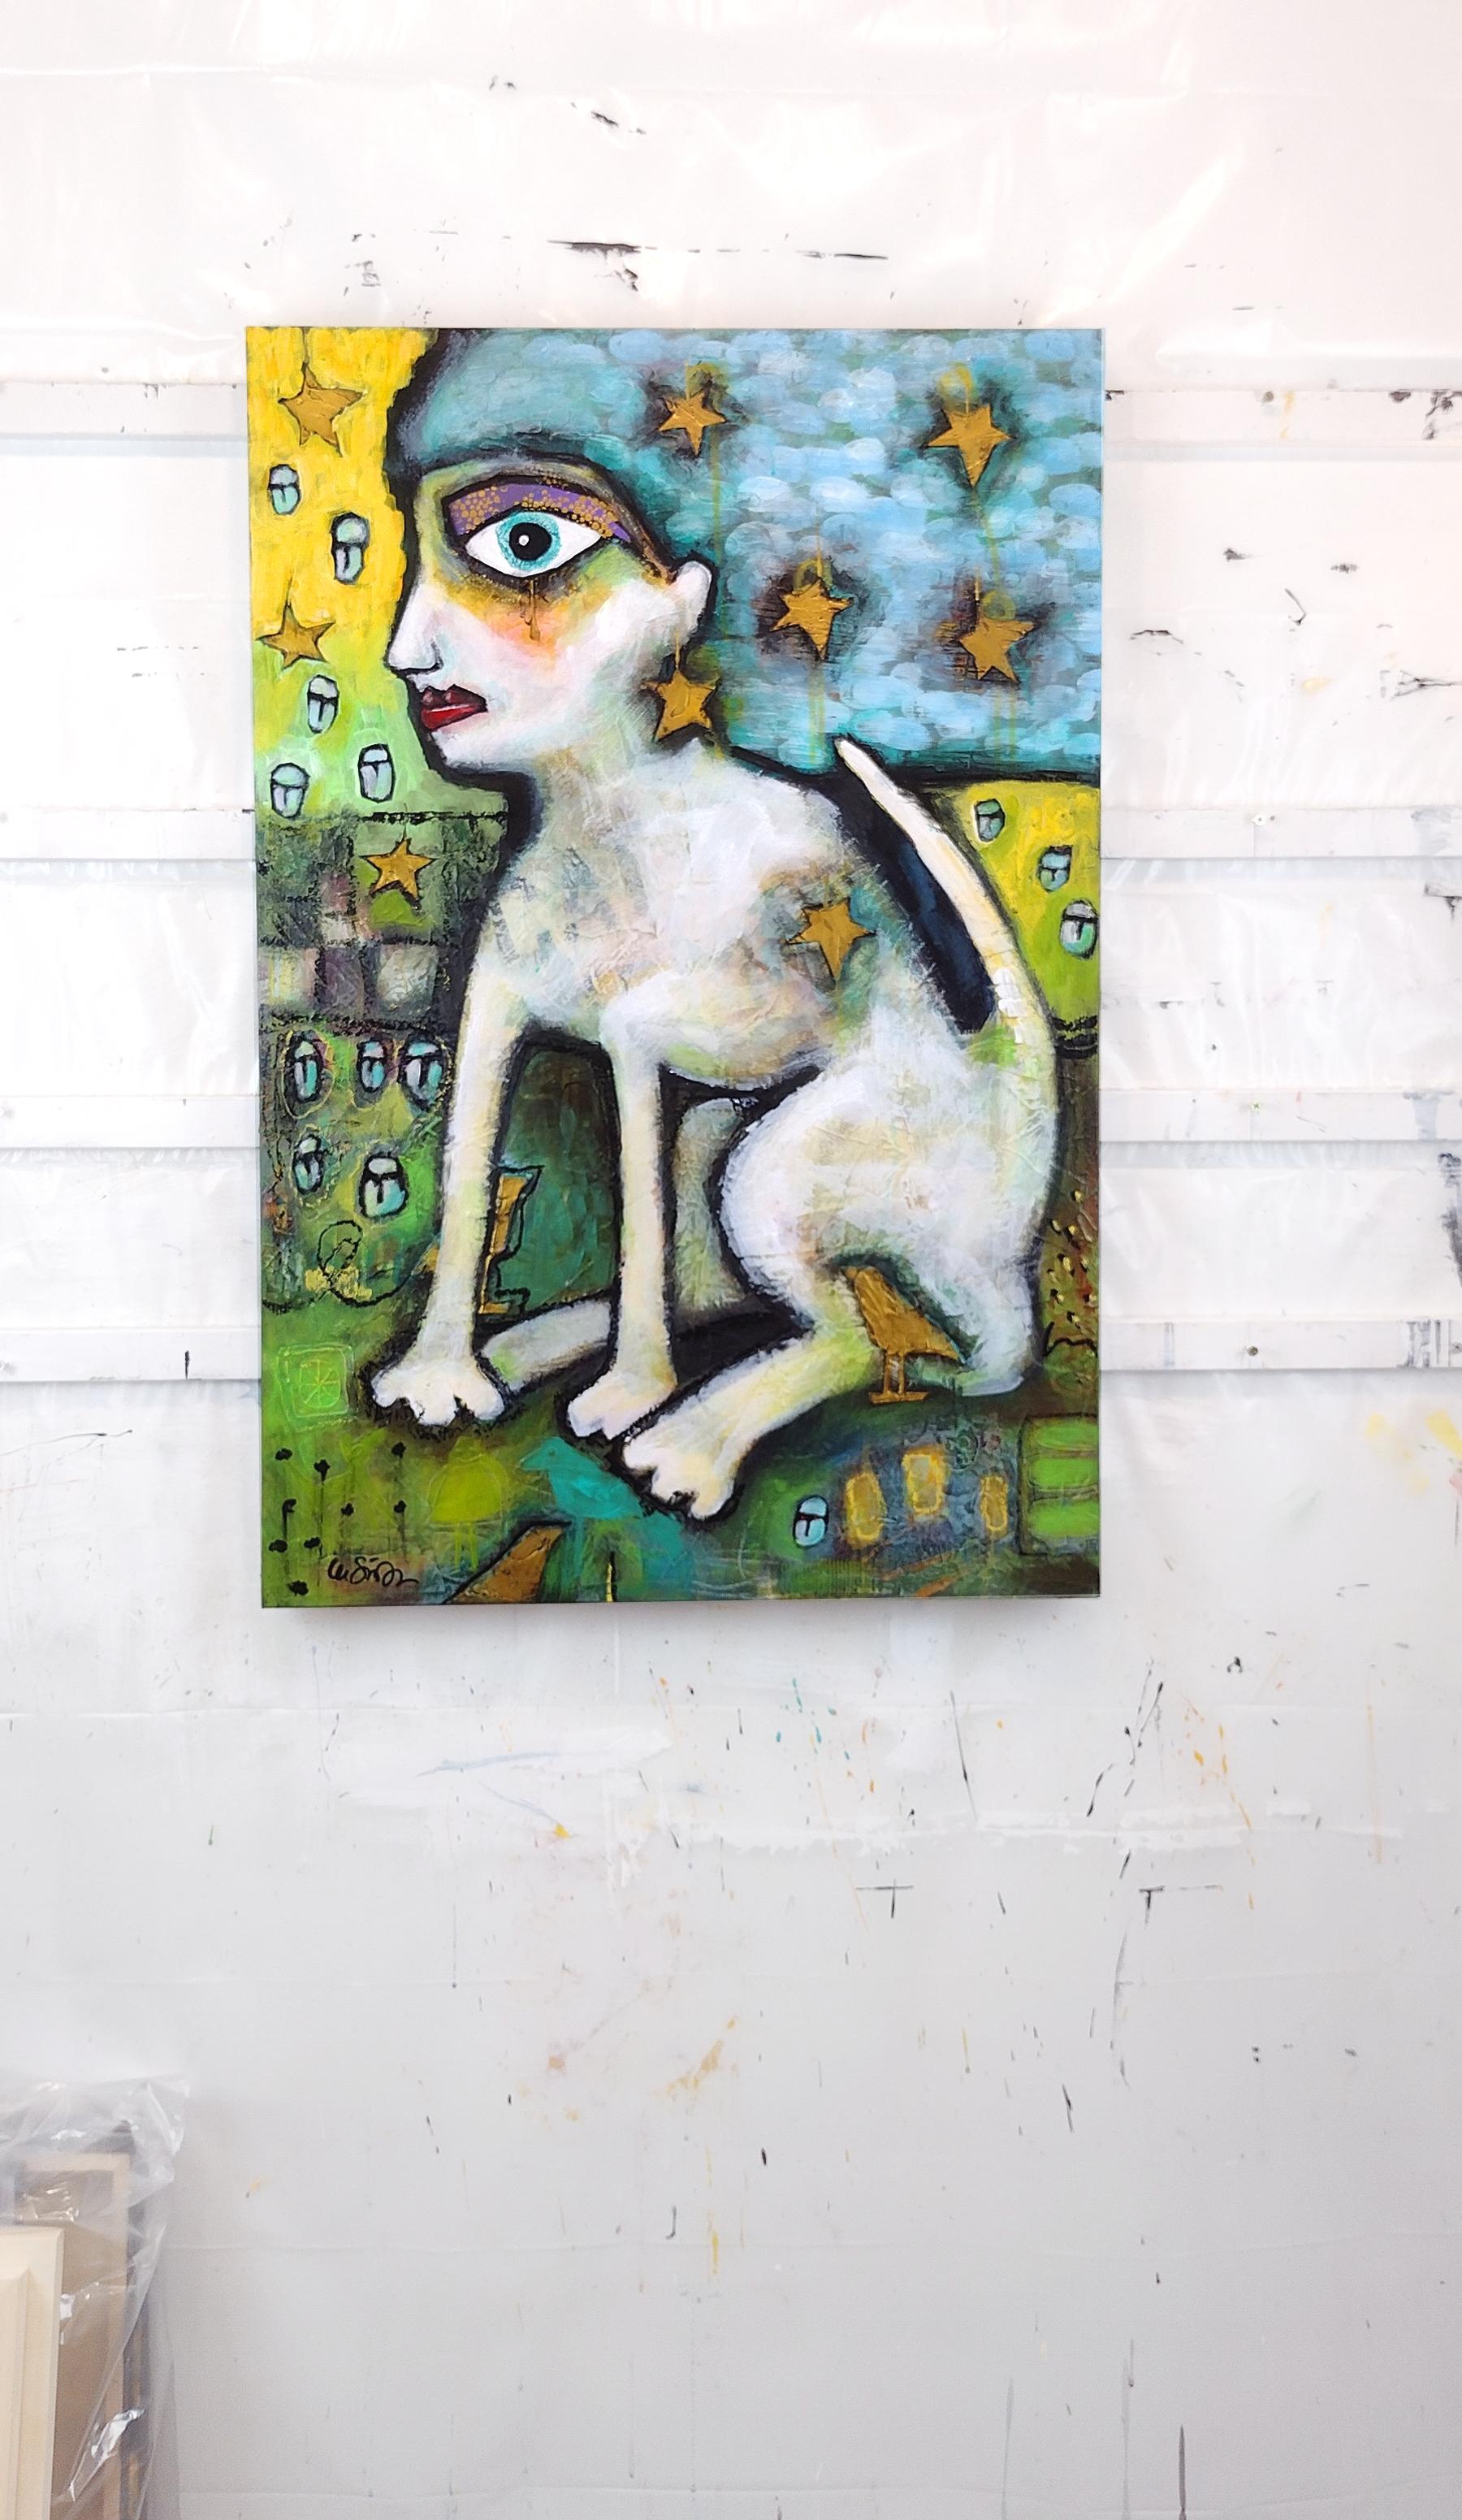 <p>Artist Comments<br>Artist Lee Smith offers an anthropomorphic cat woman that blurs the lines between human, animal, reality, and fantasy. The piece evokes a positive, uplifting, and deeply contemplative mood. The stunning portrait of the lady